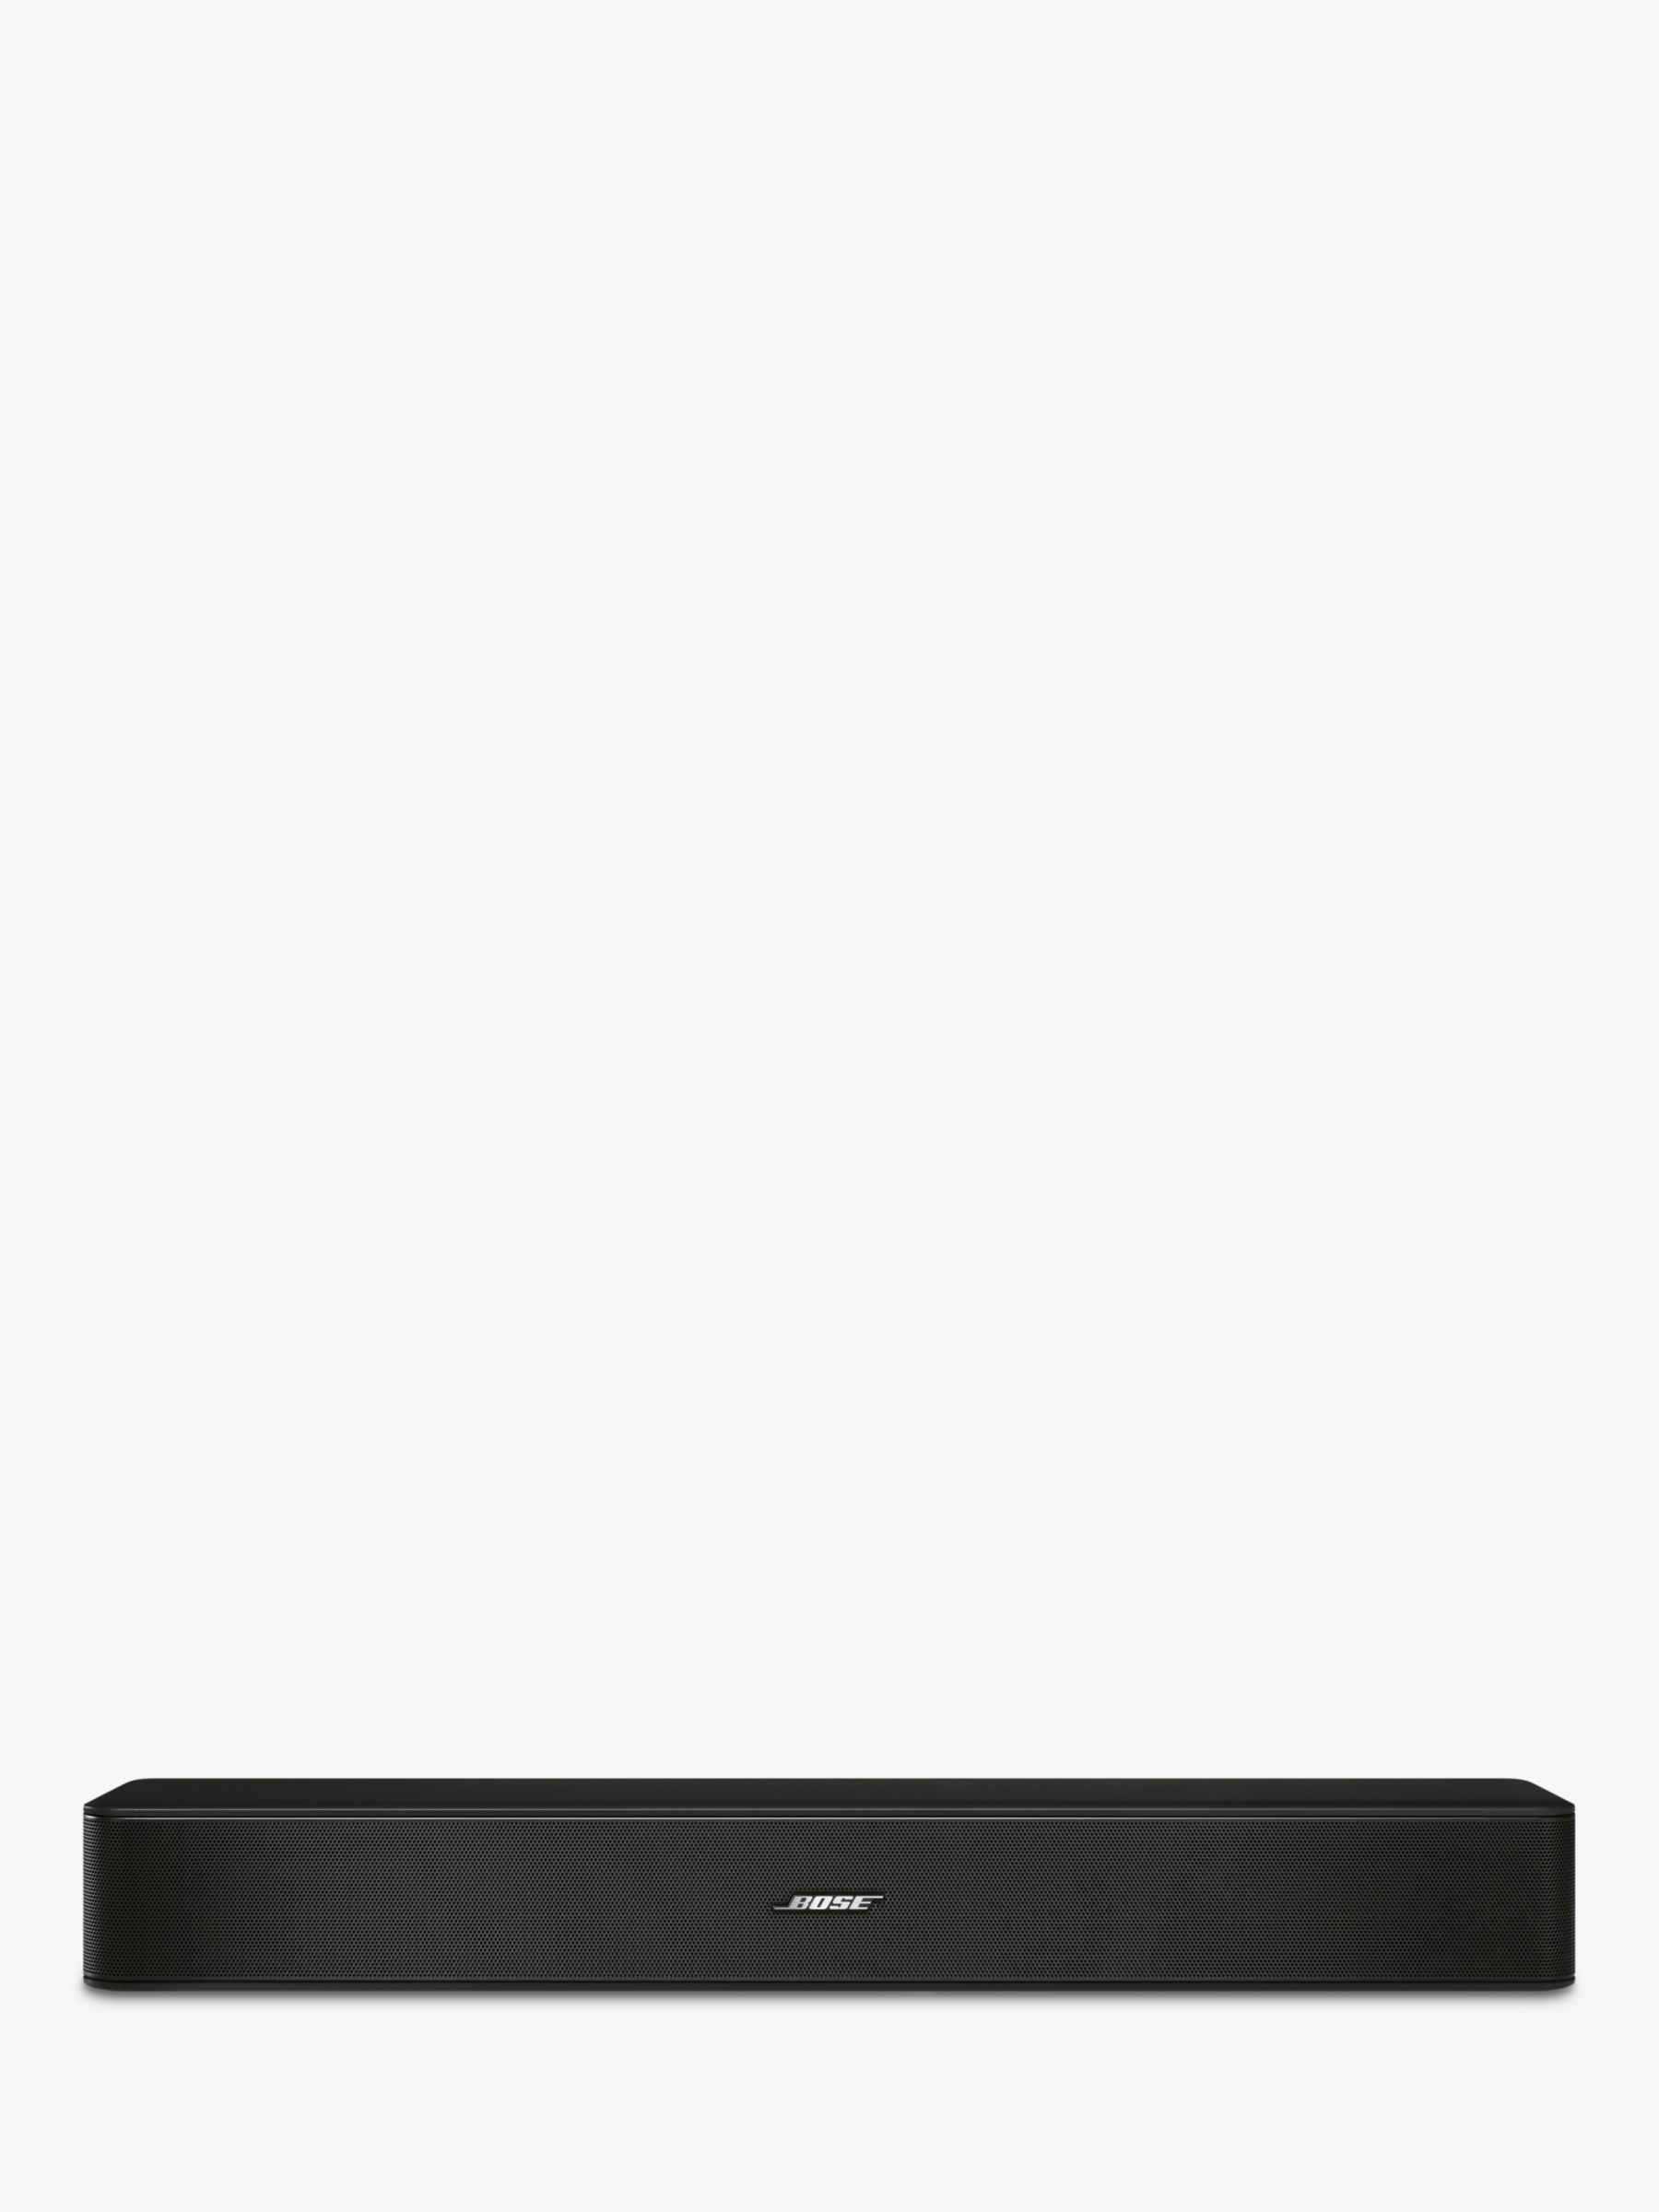 Bose® Solo 5 Sound Bar with Bluetooth 